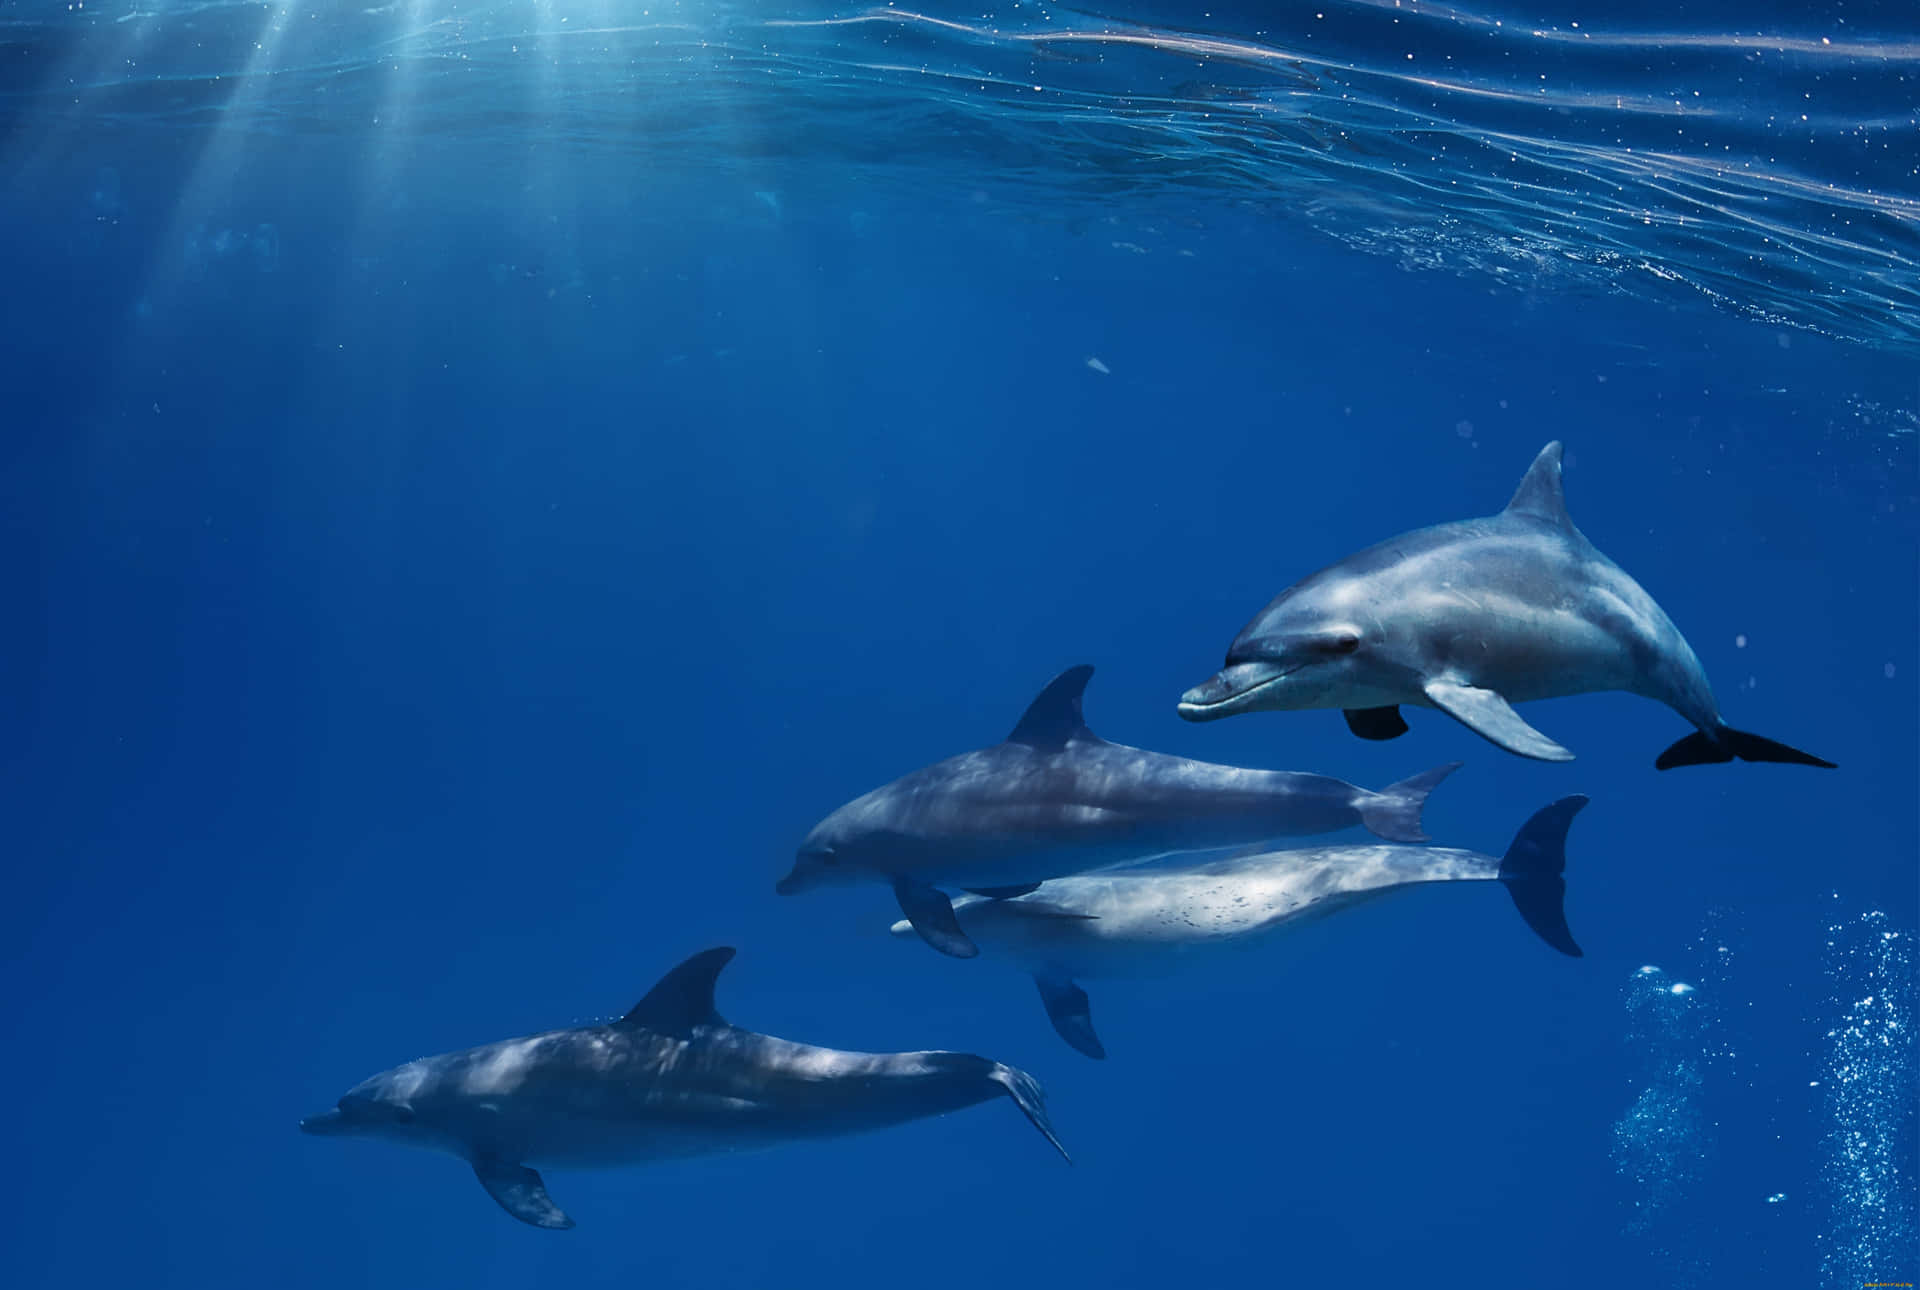 Two dolphins swimming gracefully in the ocean